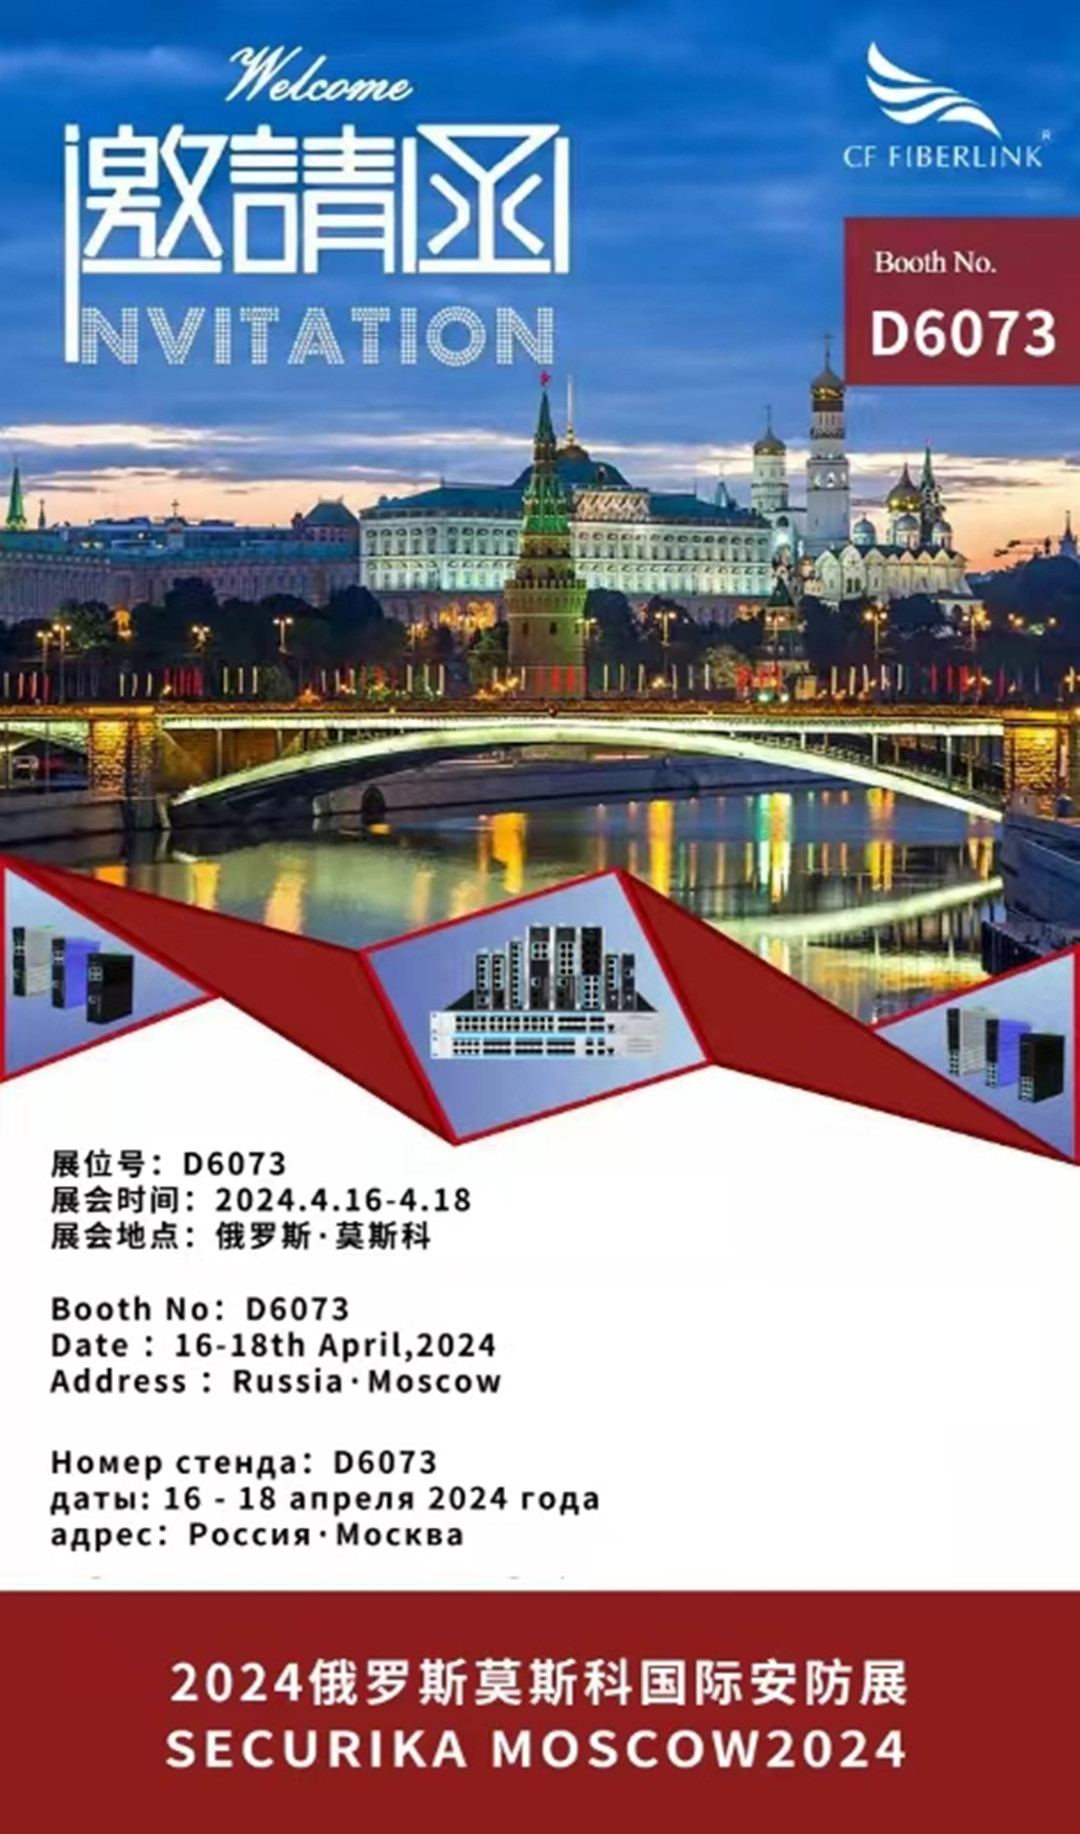 YFC photoelectric is waiting for you in Russia